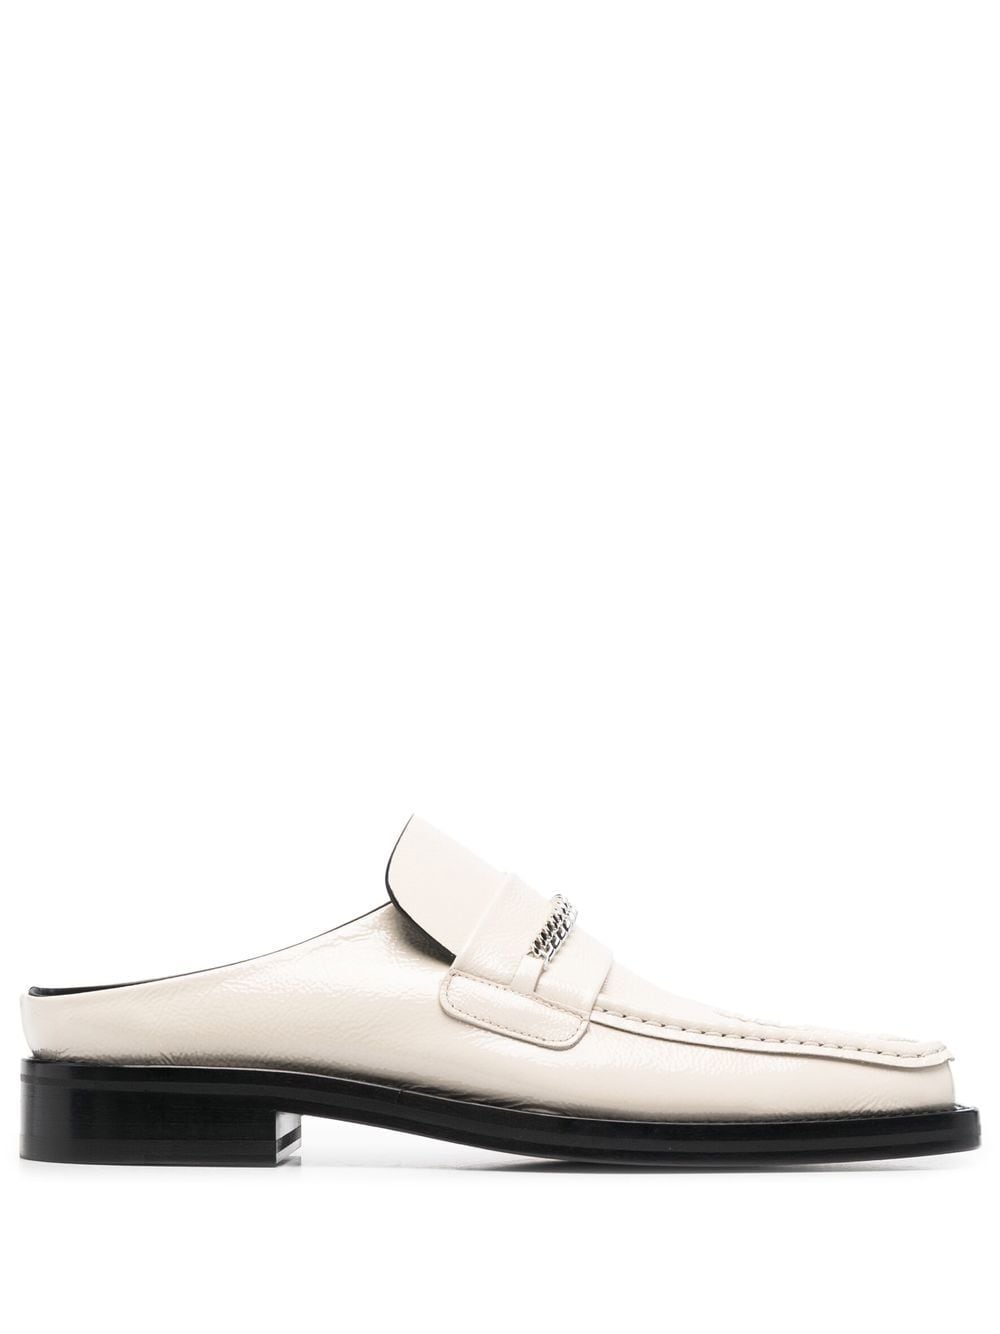 MARTINE ROSE CHAIN-DETAIL MULE LOAFERS